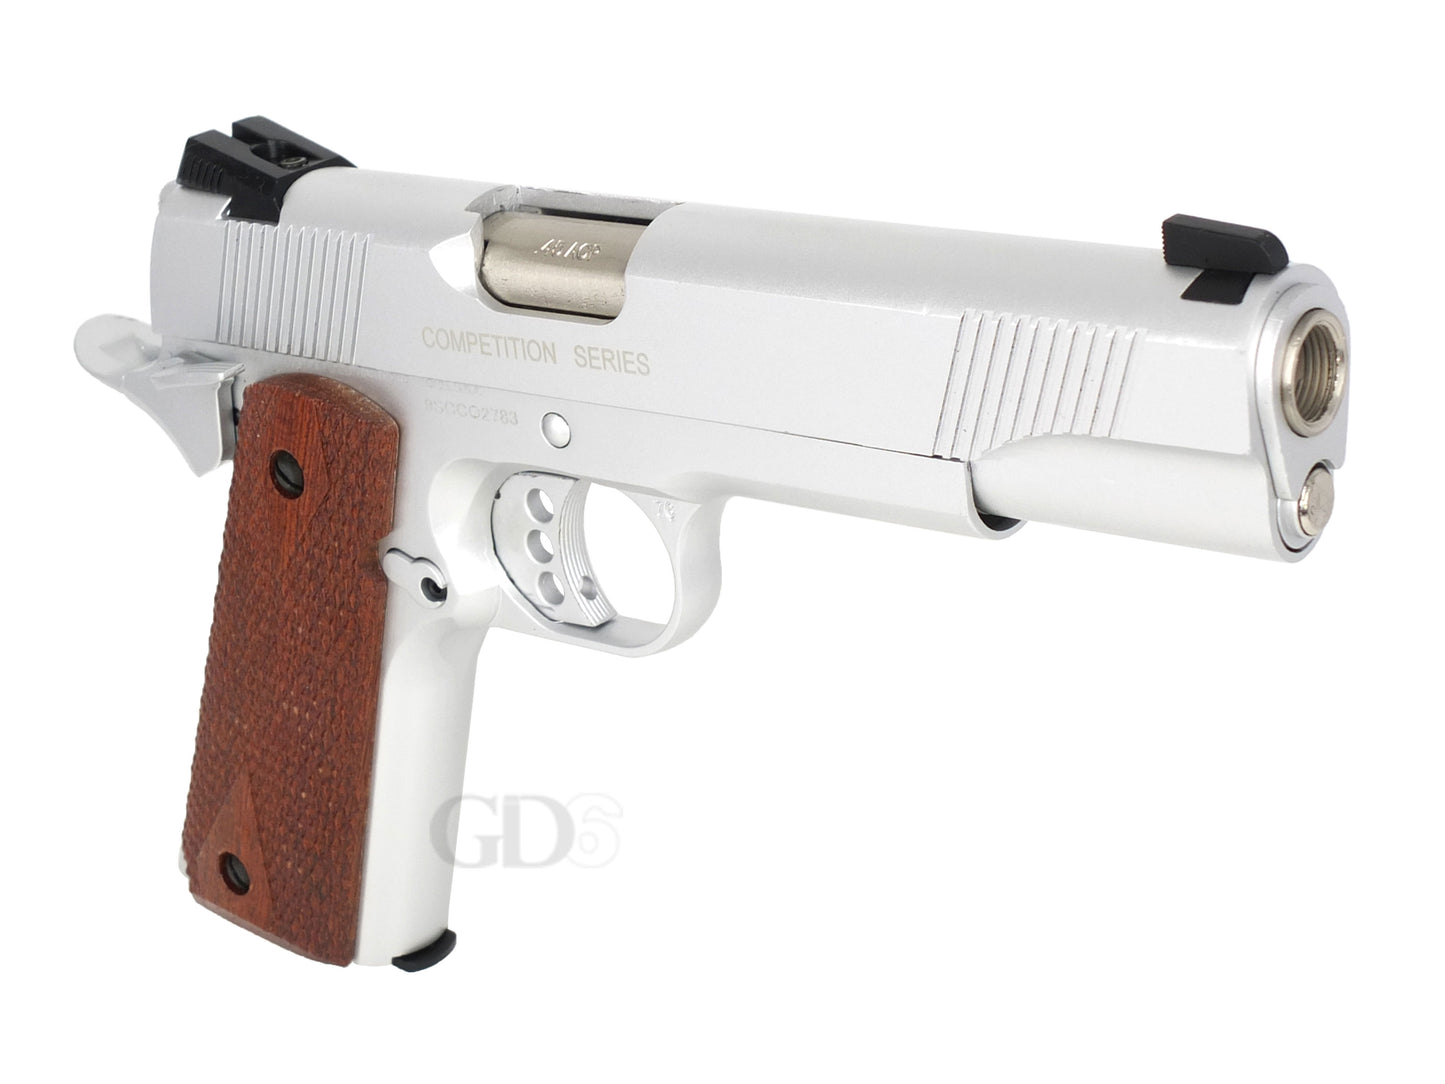 ARMY Colt Competition Government S70 .45 コルト コンペ ガバメント S70 M1911A1 ガスブローバック ハンドガン メタルパーツ セット.